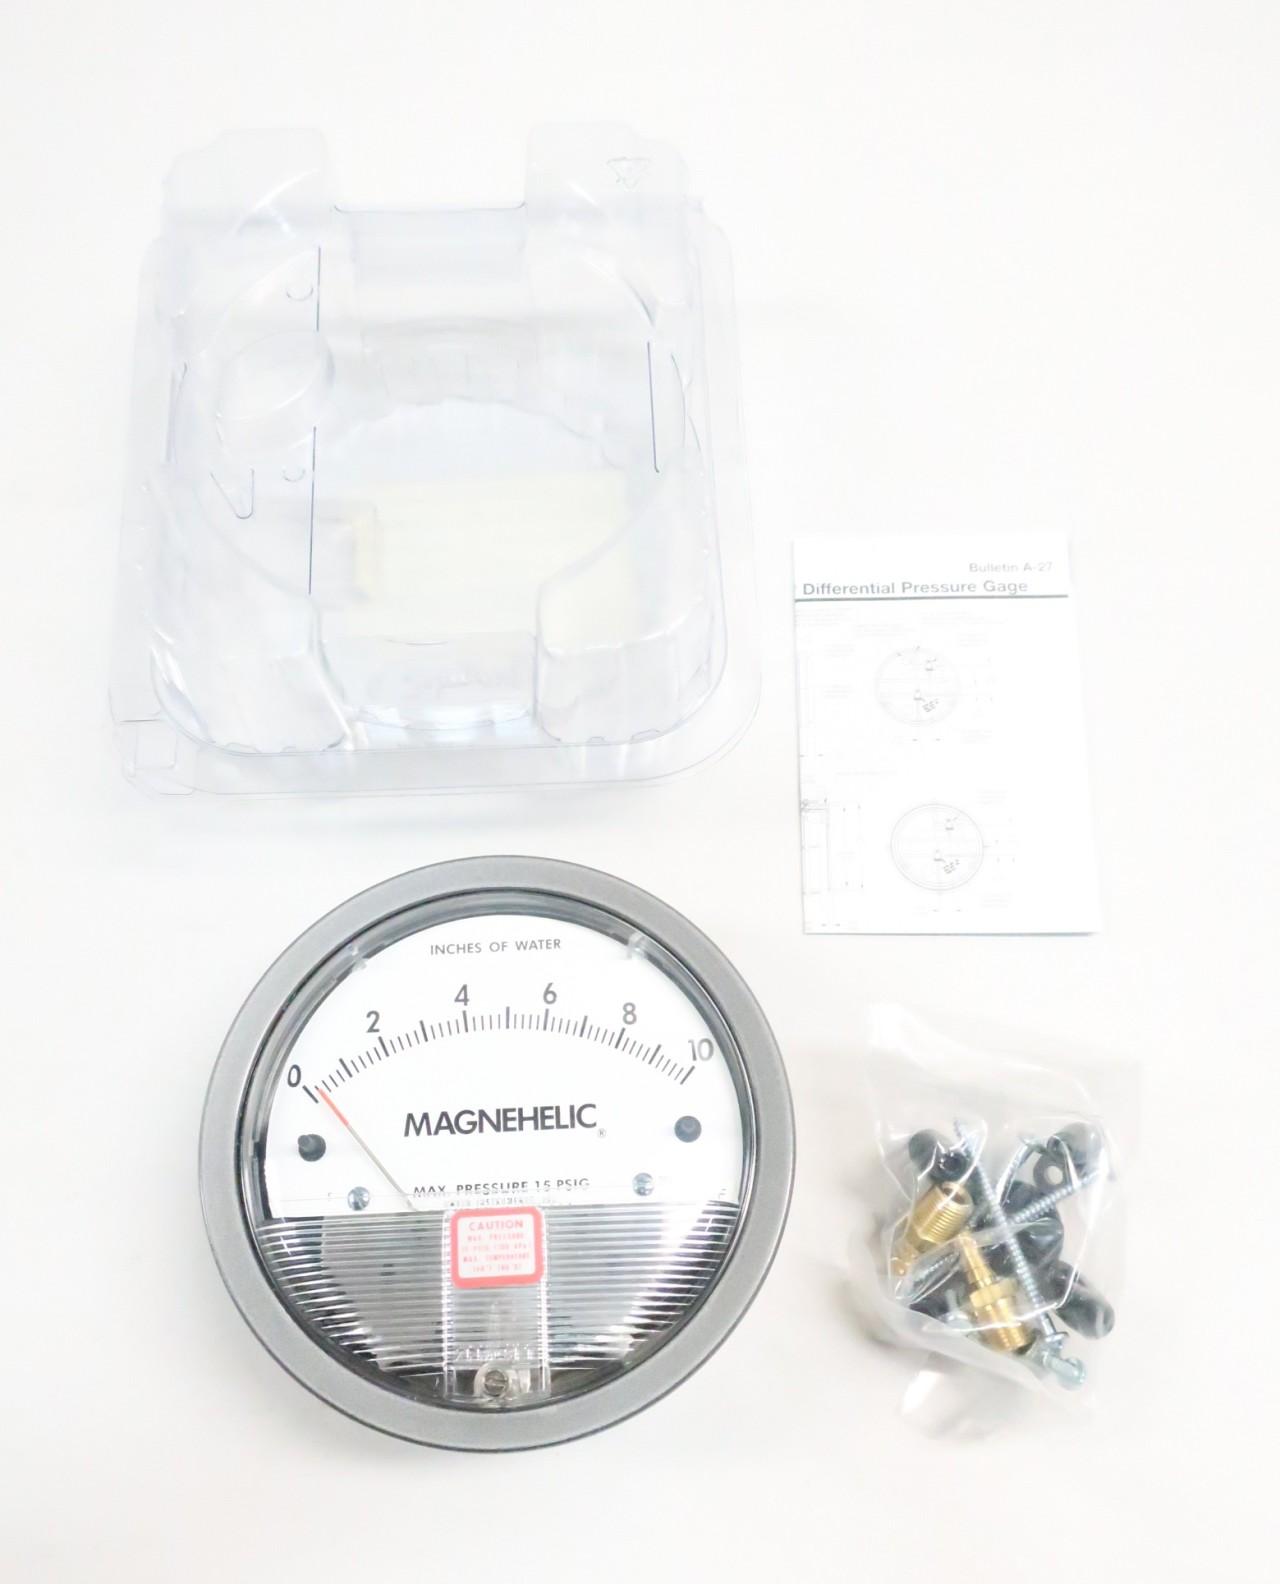 Details about   Dwyer 2010 Magnehelic Differential Pressure Gauge 0-10"w.c. NEW 